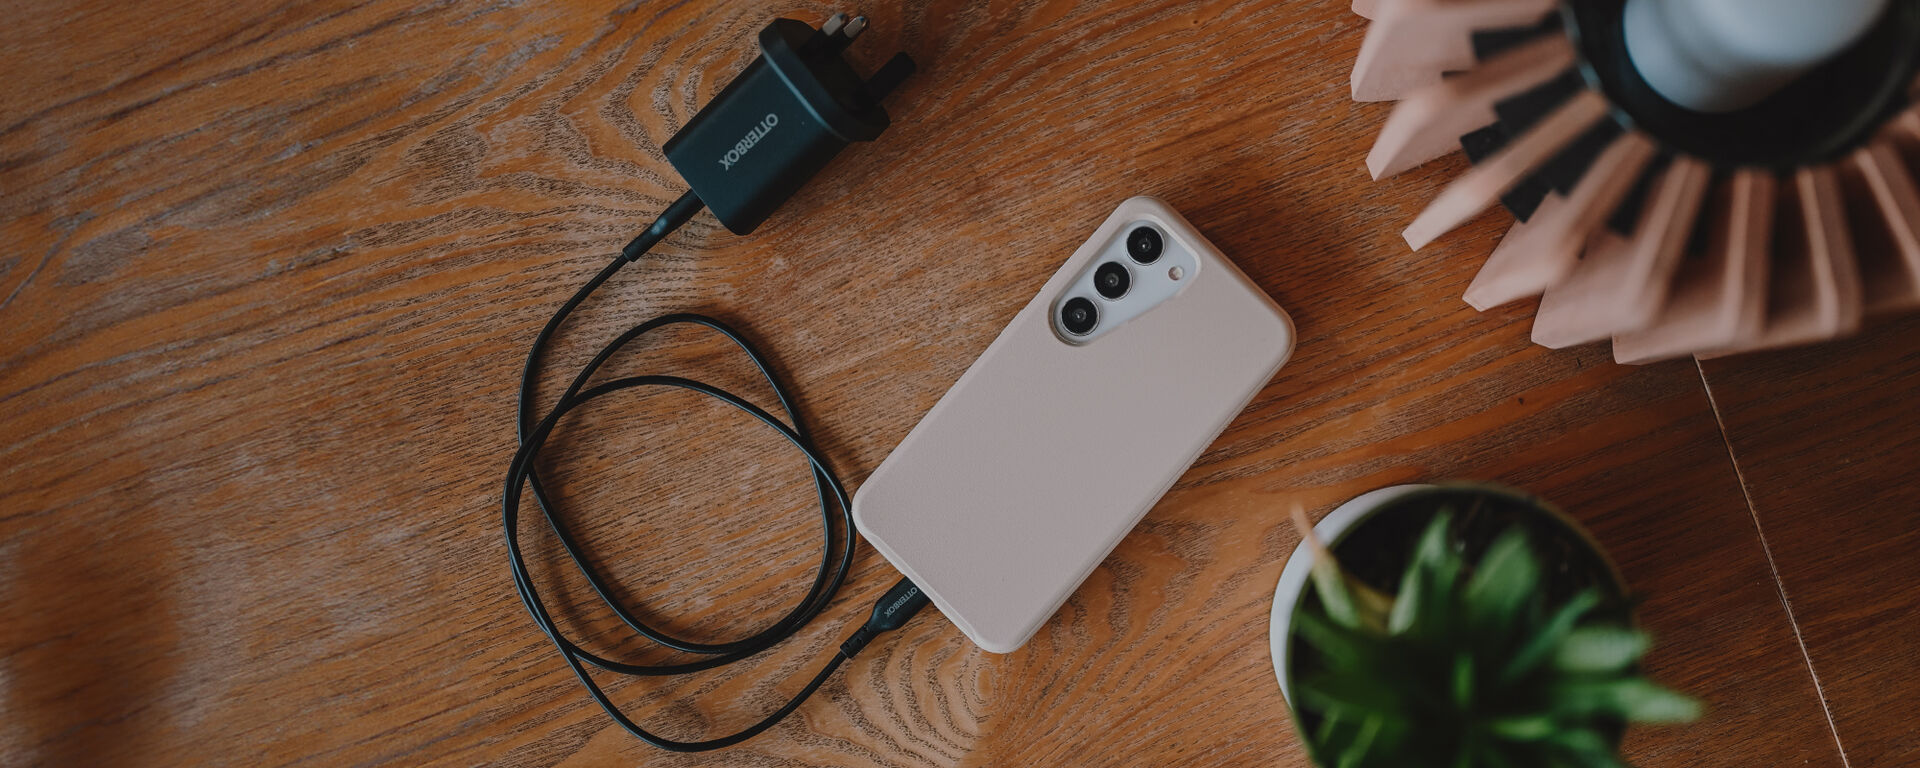 Charging Accessories for Android